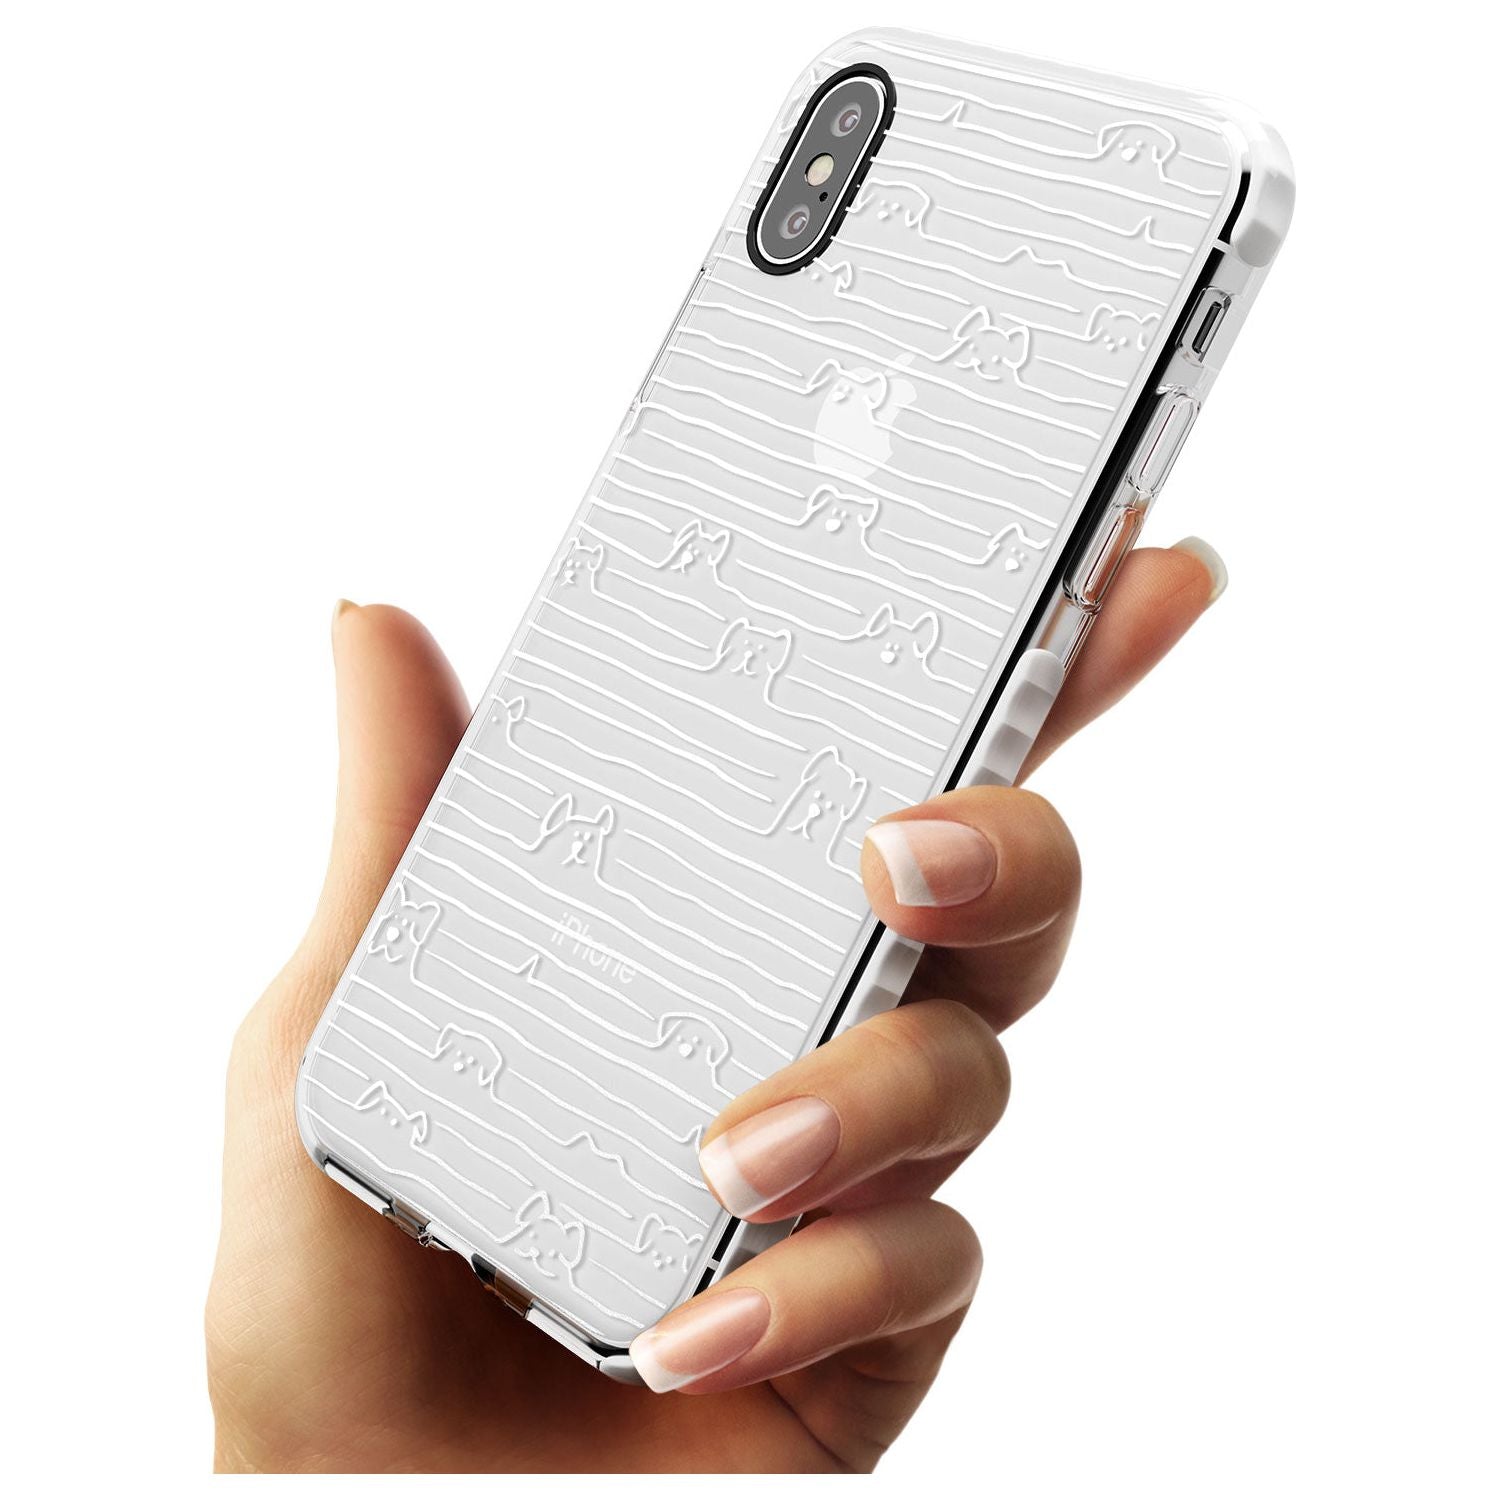 Dog Line Art - White Impact Phone Case for iPhone X XS Max XR